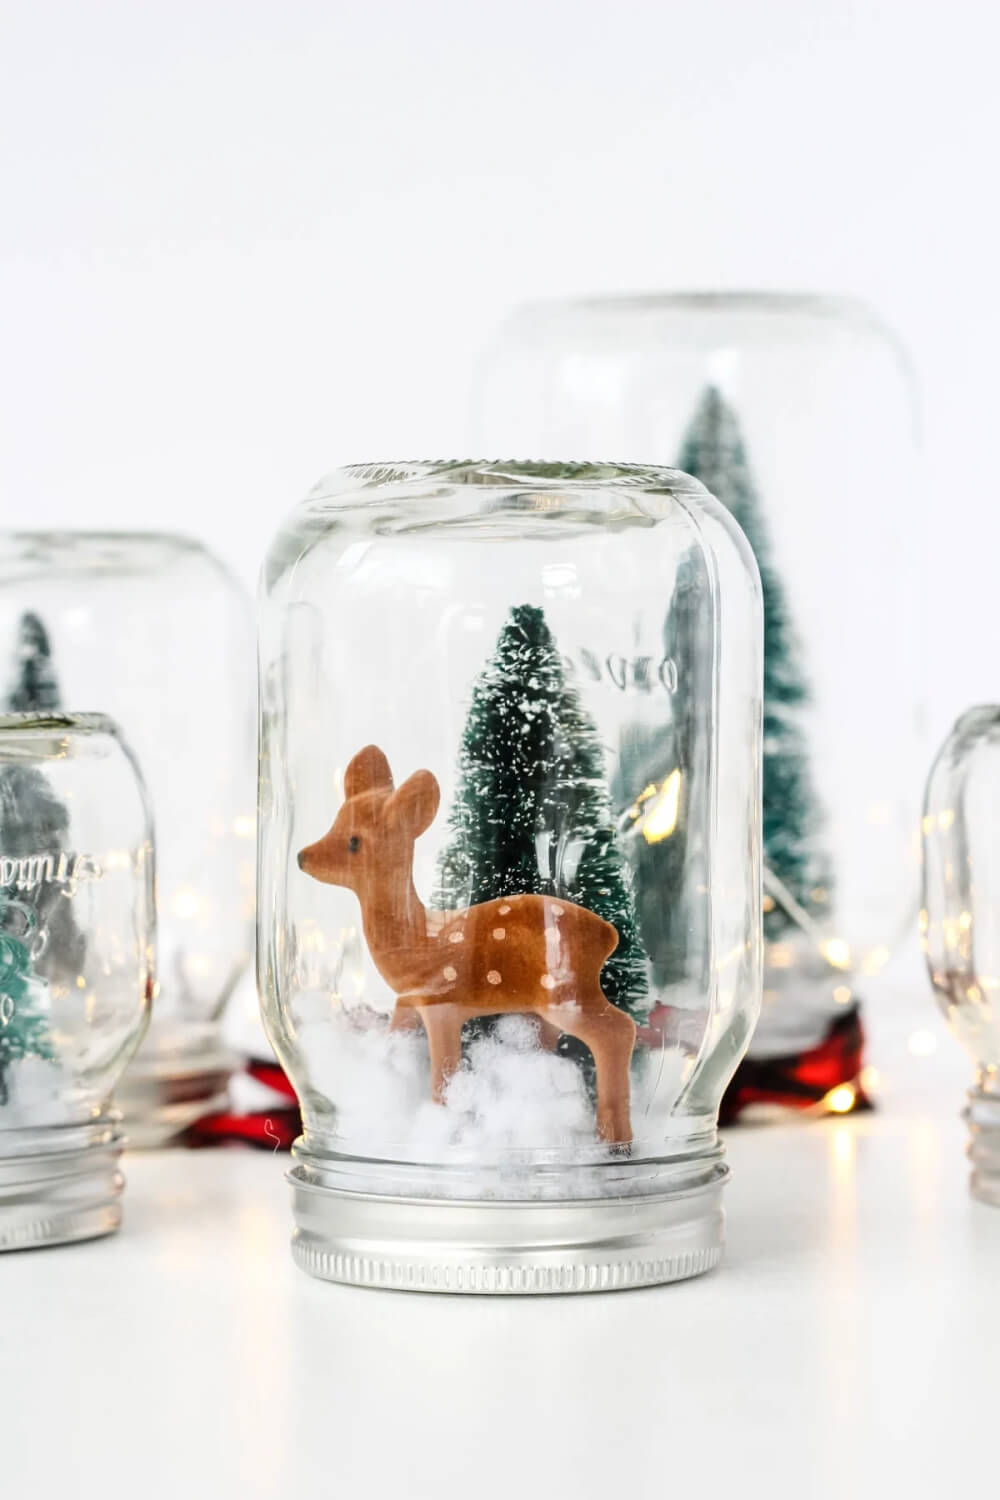 In The Love Of Home Files #11, this is homemade winter snow globes